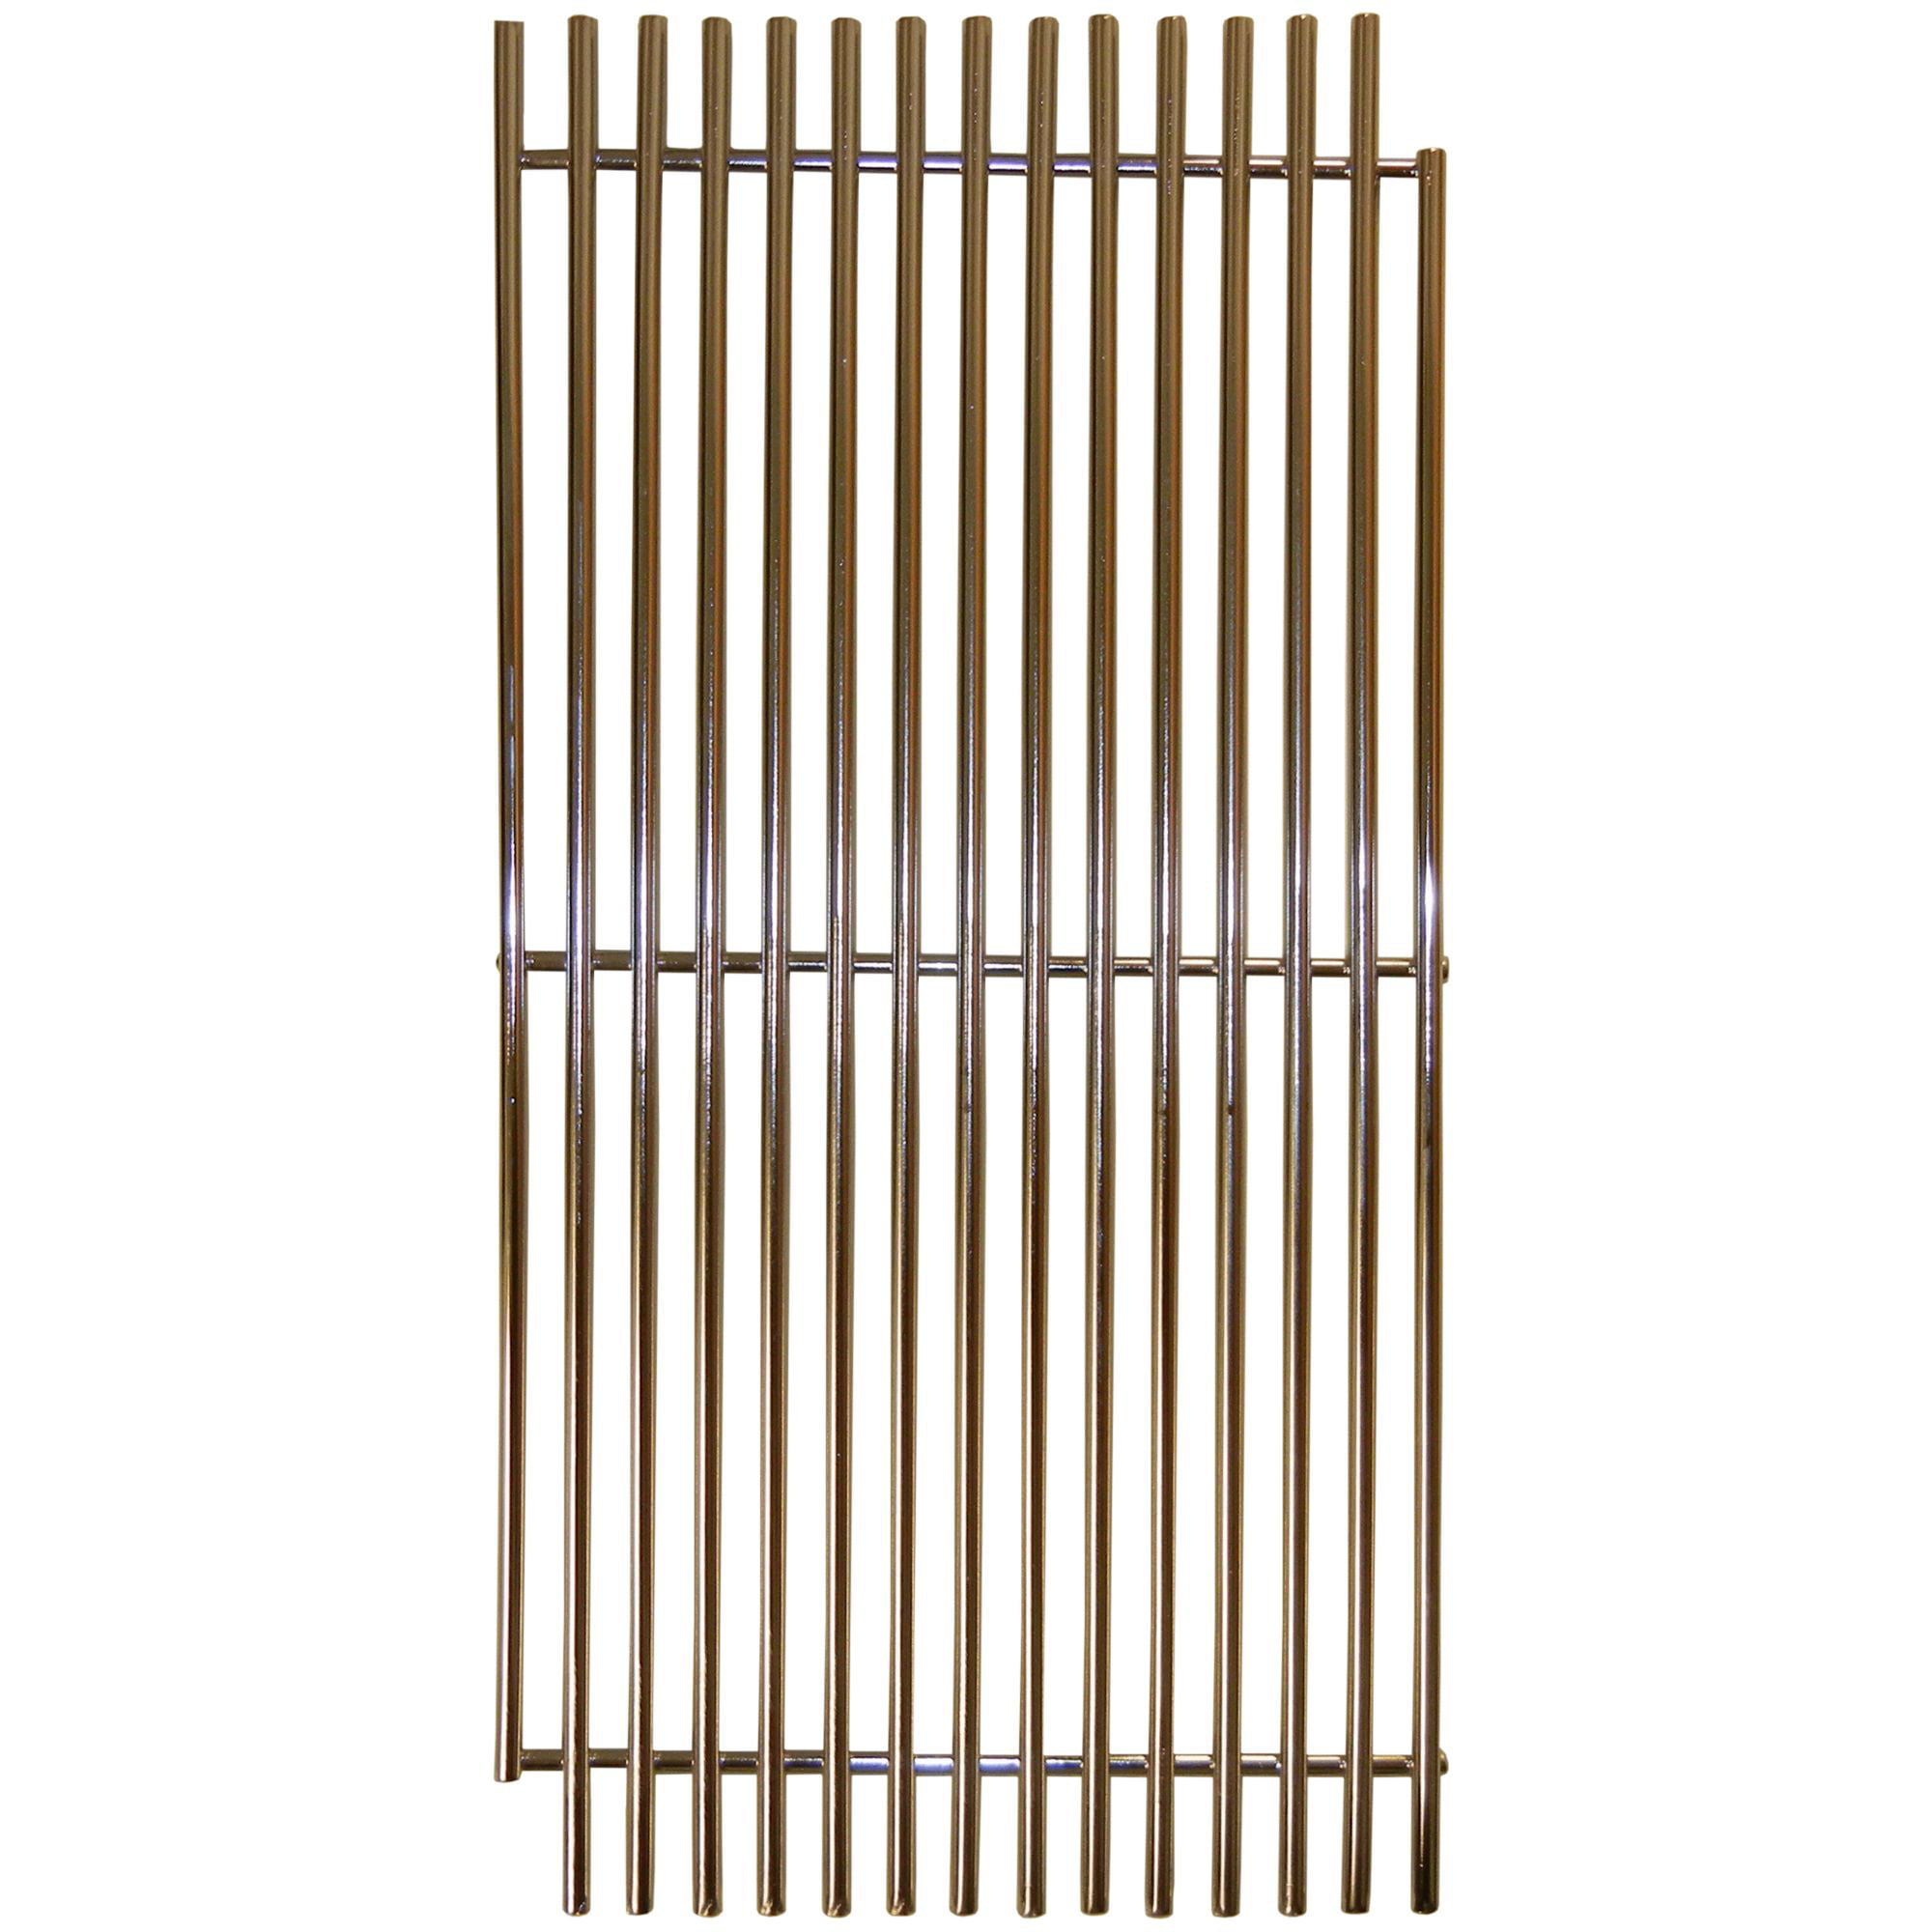 DCS BGB36-BQARN Stainless Steel Wire Cooking Grid Replacement Part 